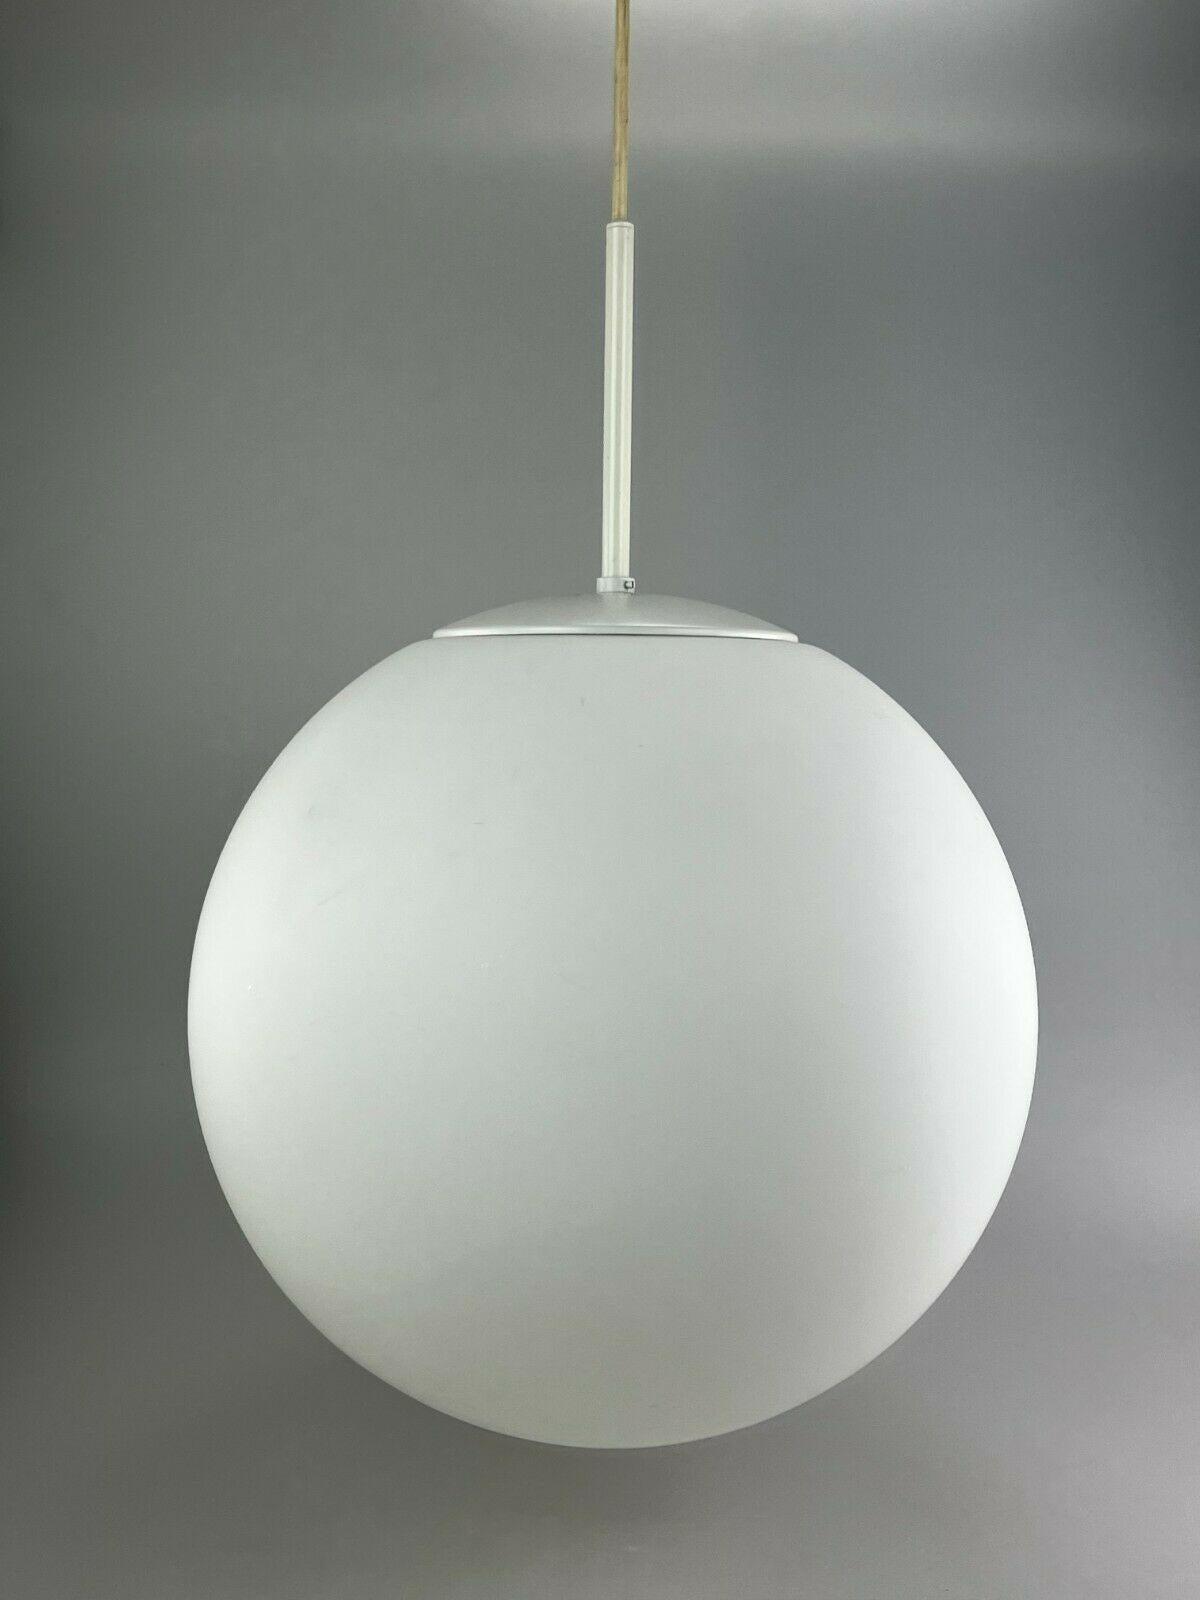 XXL 60s 70s Lamp Light Ceiling Lamp Limburg Spherical Lamp Ball Design  In Good Condition For Sale In Neuenkirchen, NI